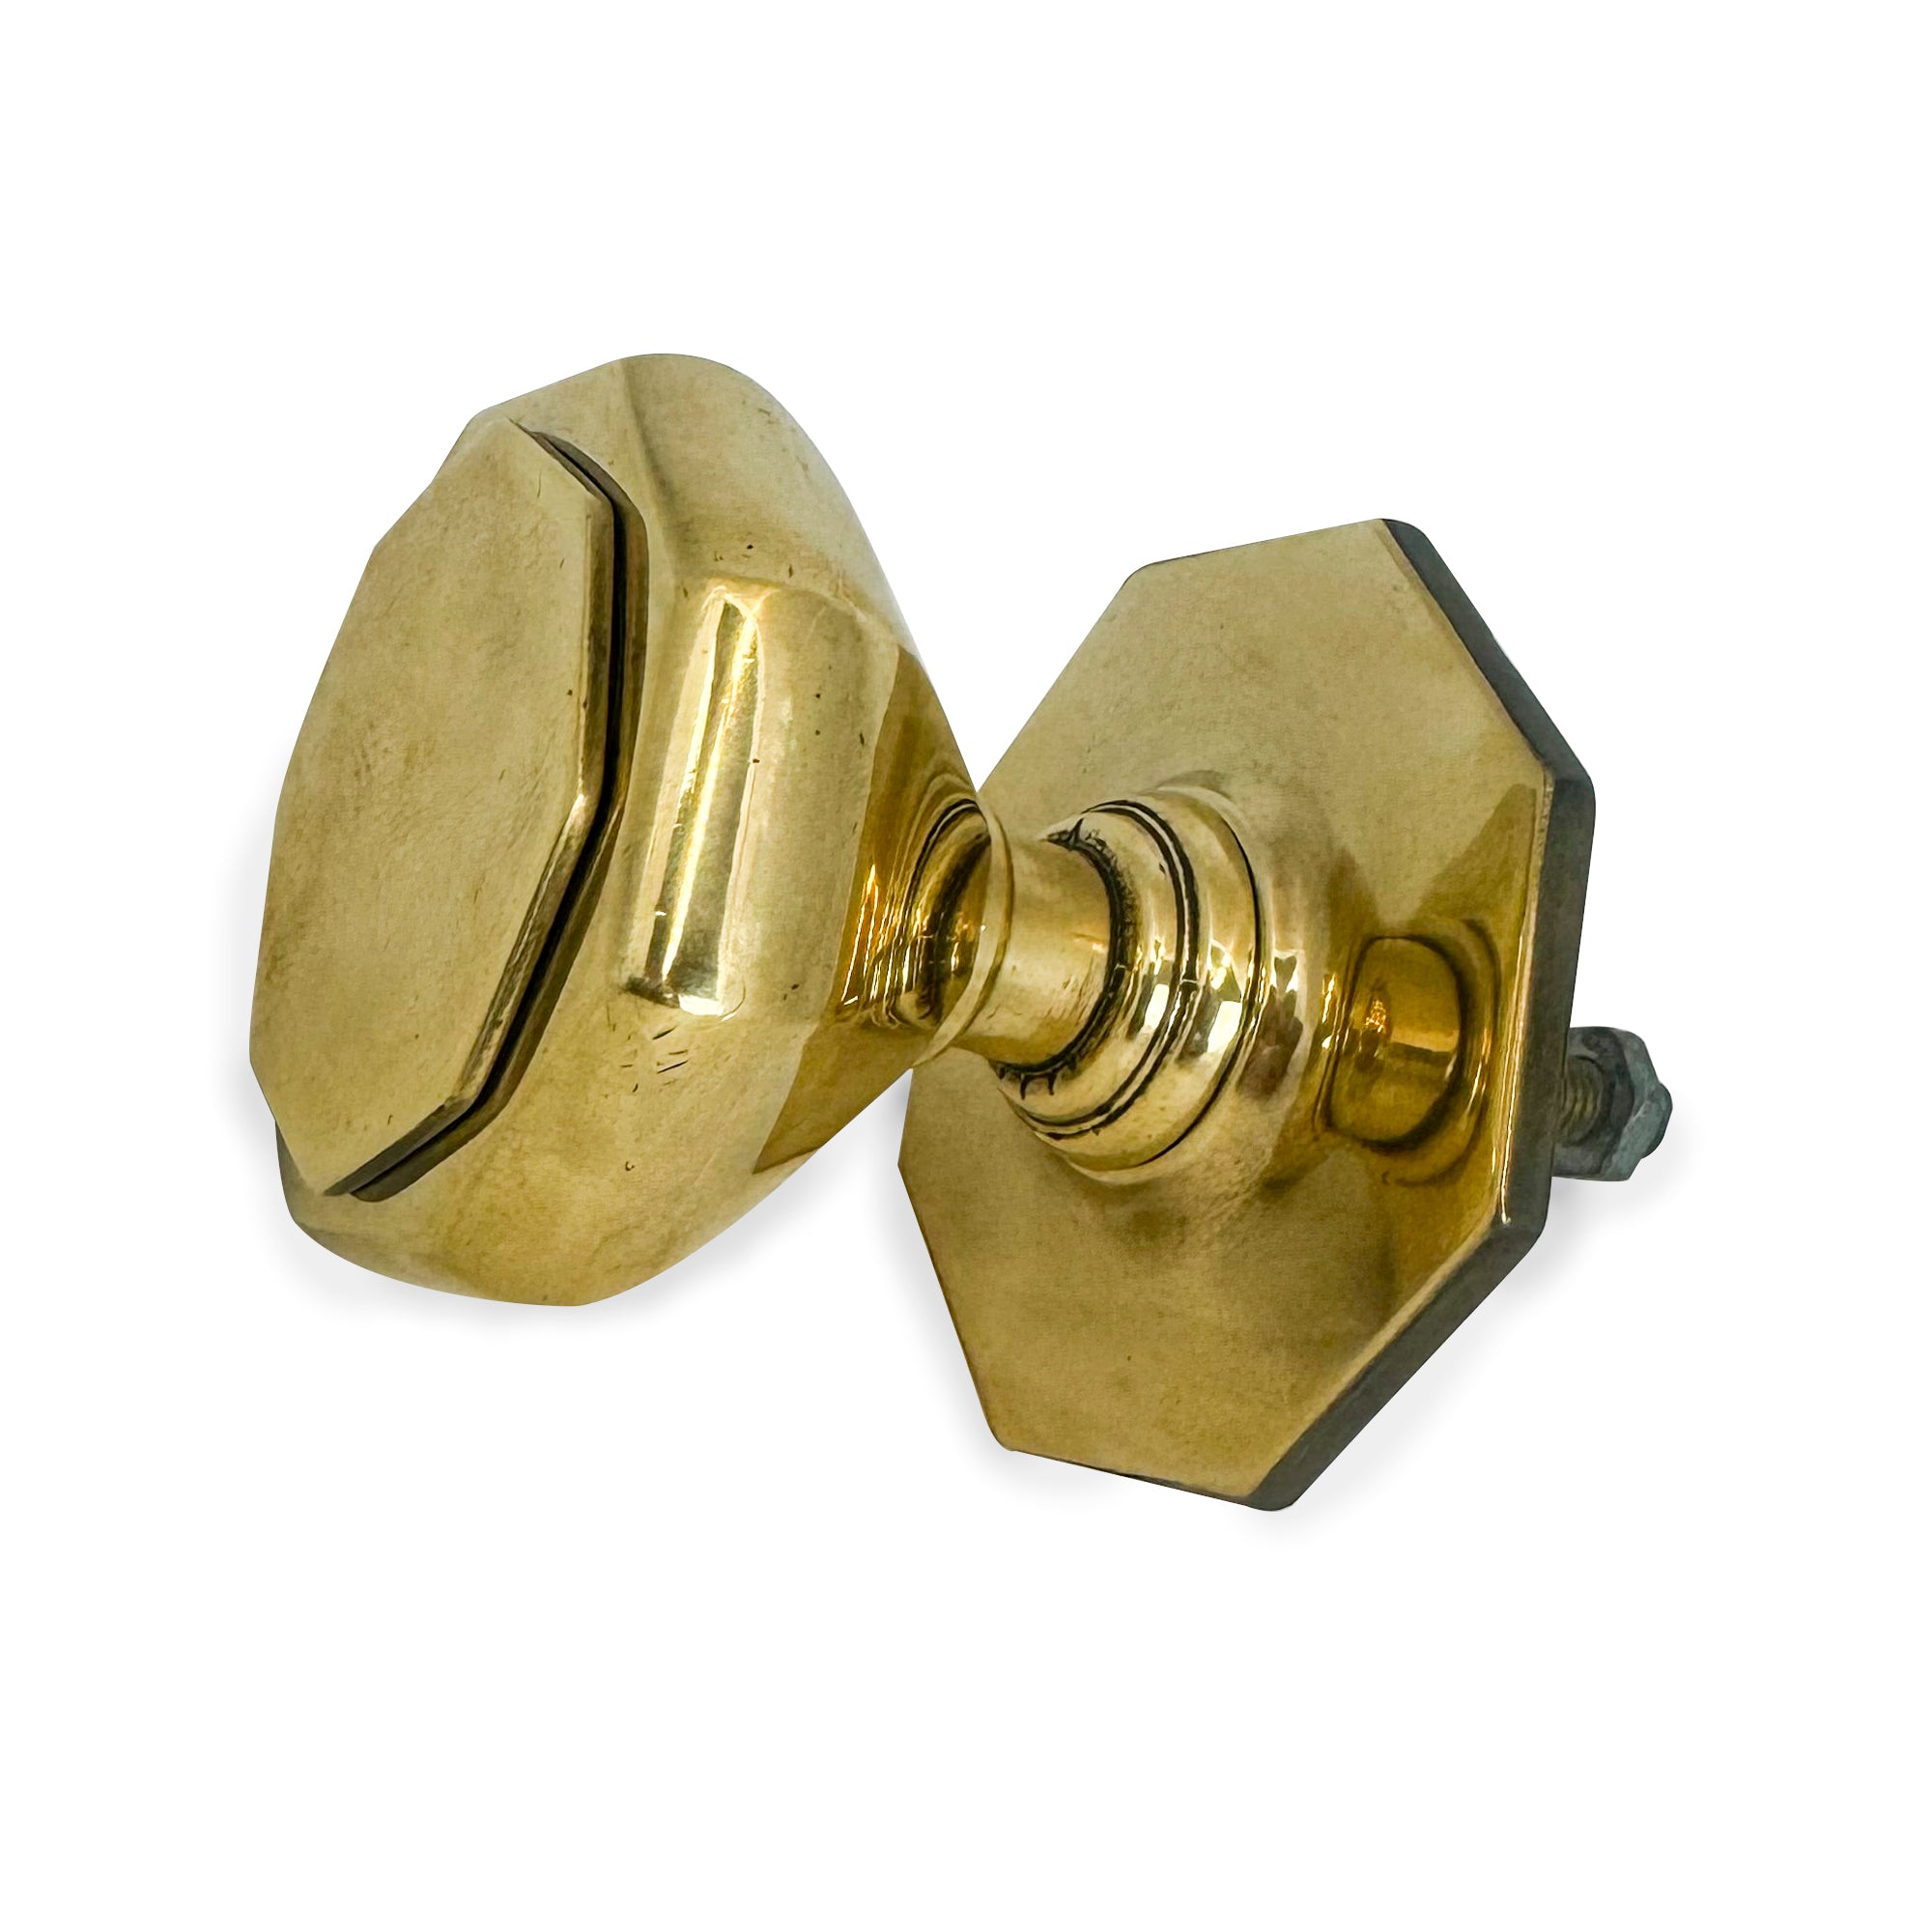 Single Antique Octagonal Brass Pull Handle | The Architectural Forum